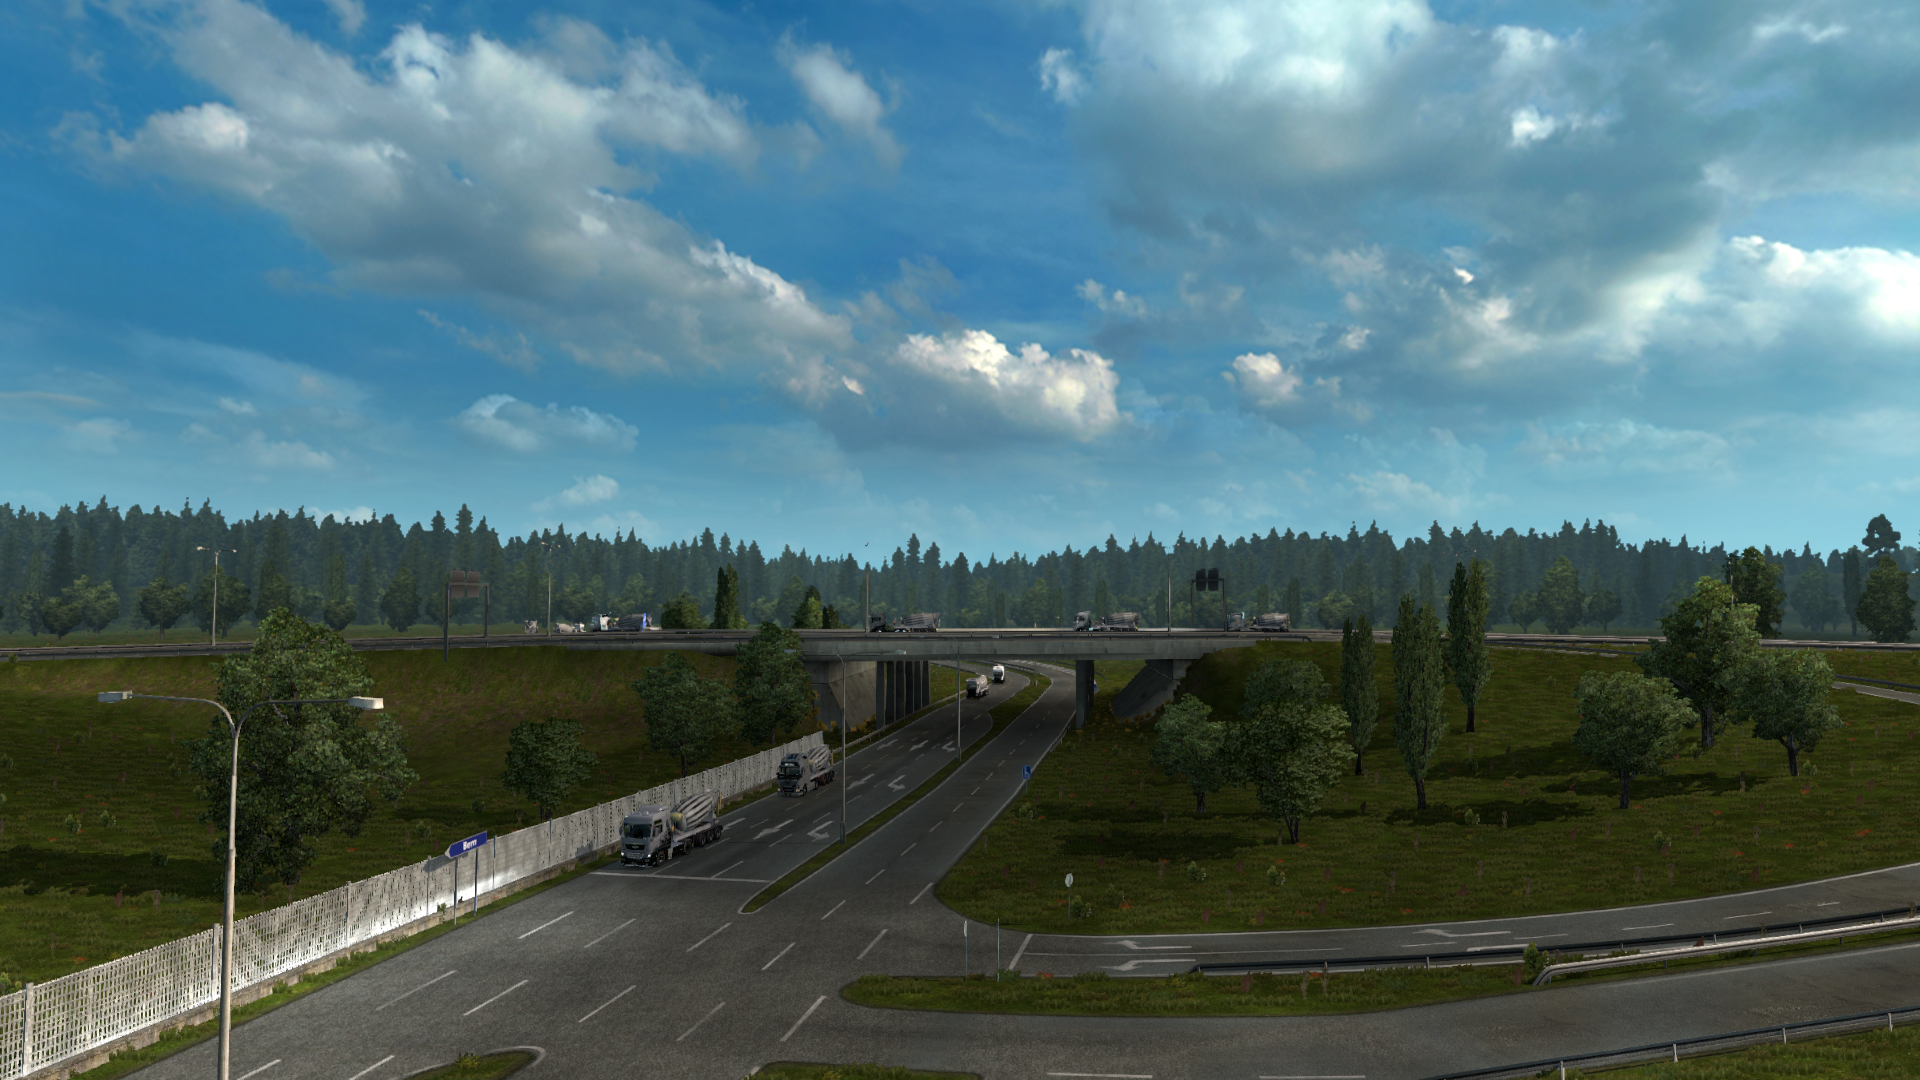 ets2_20181005_234351_00.png